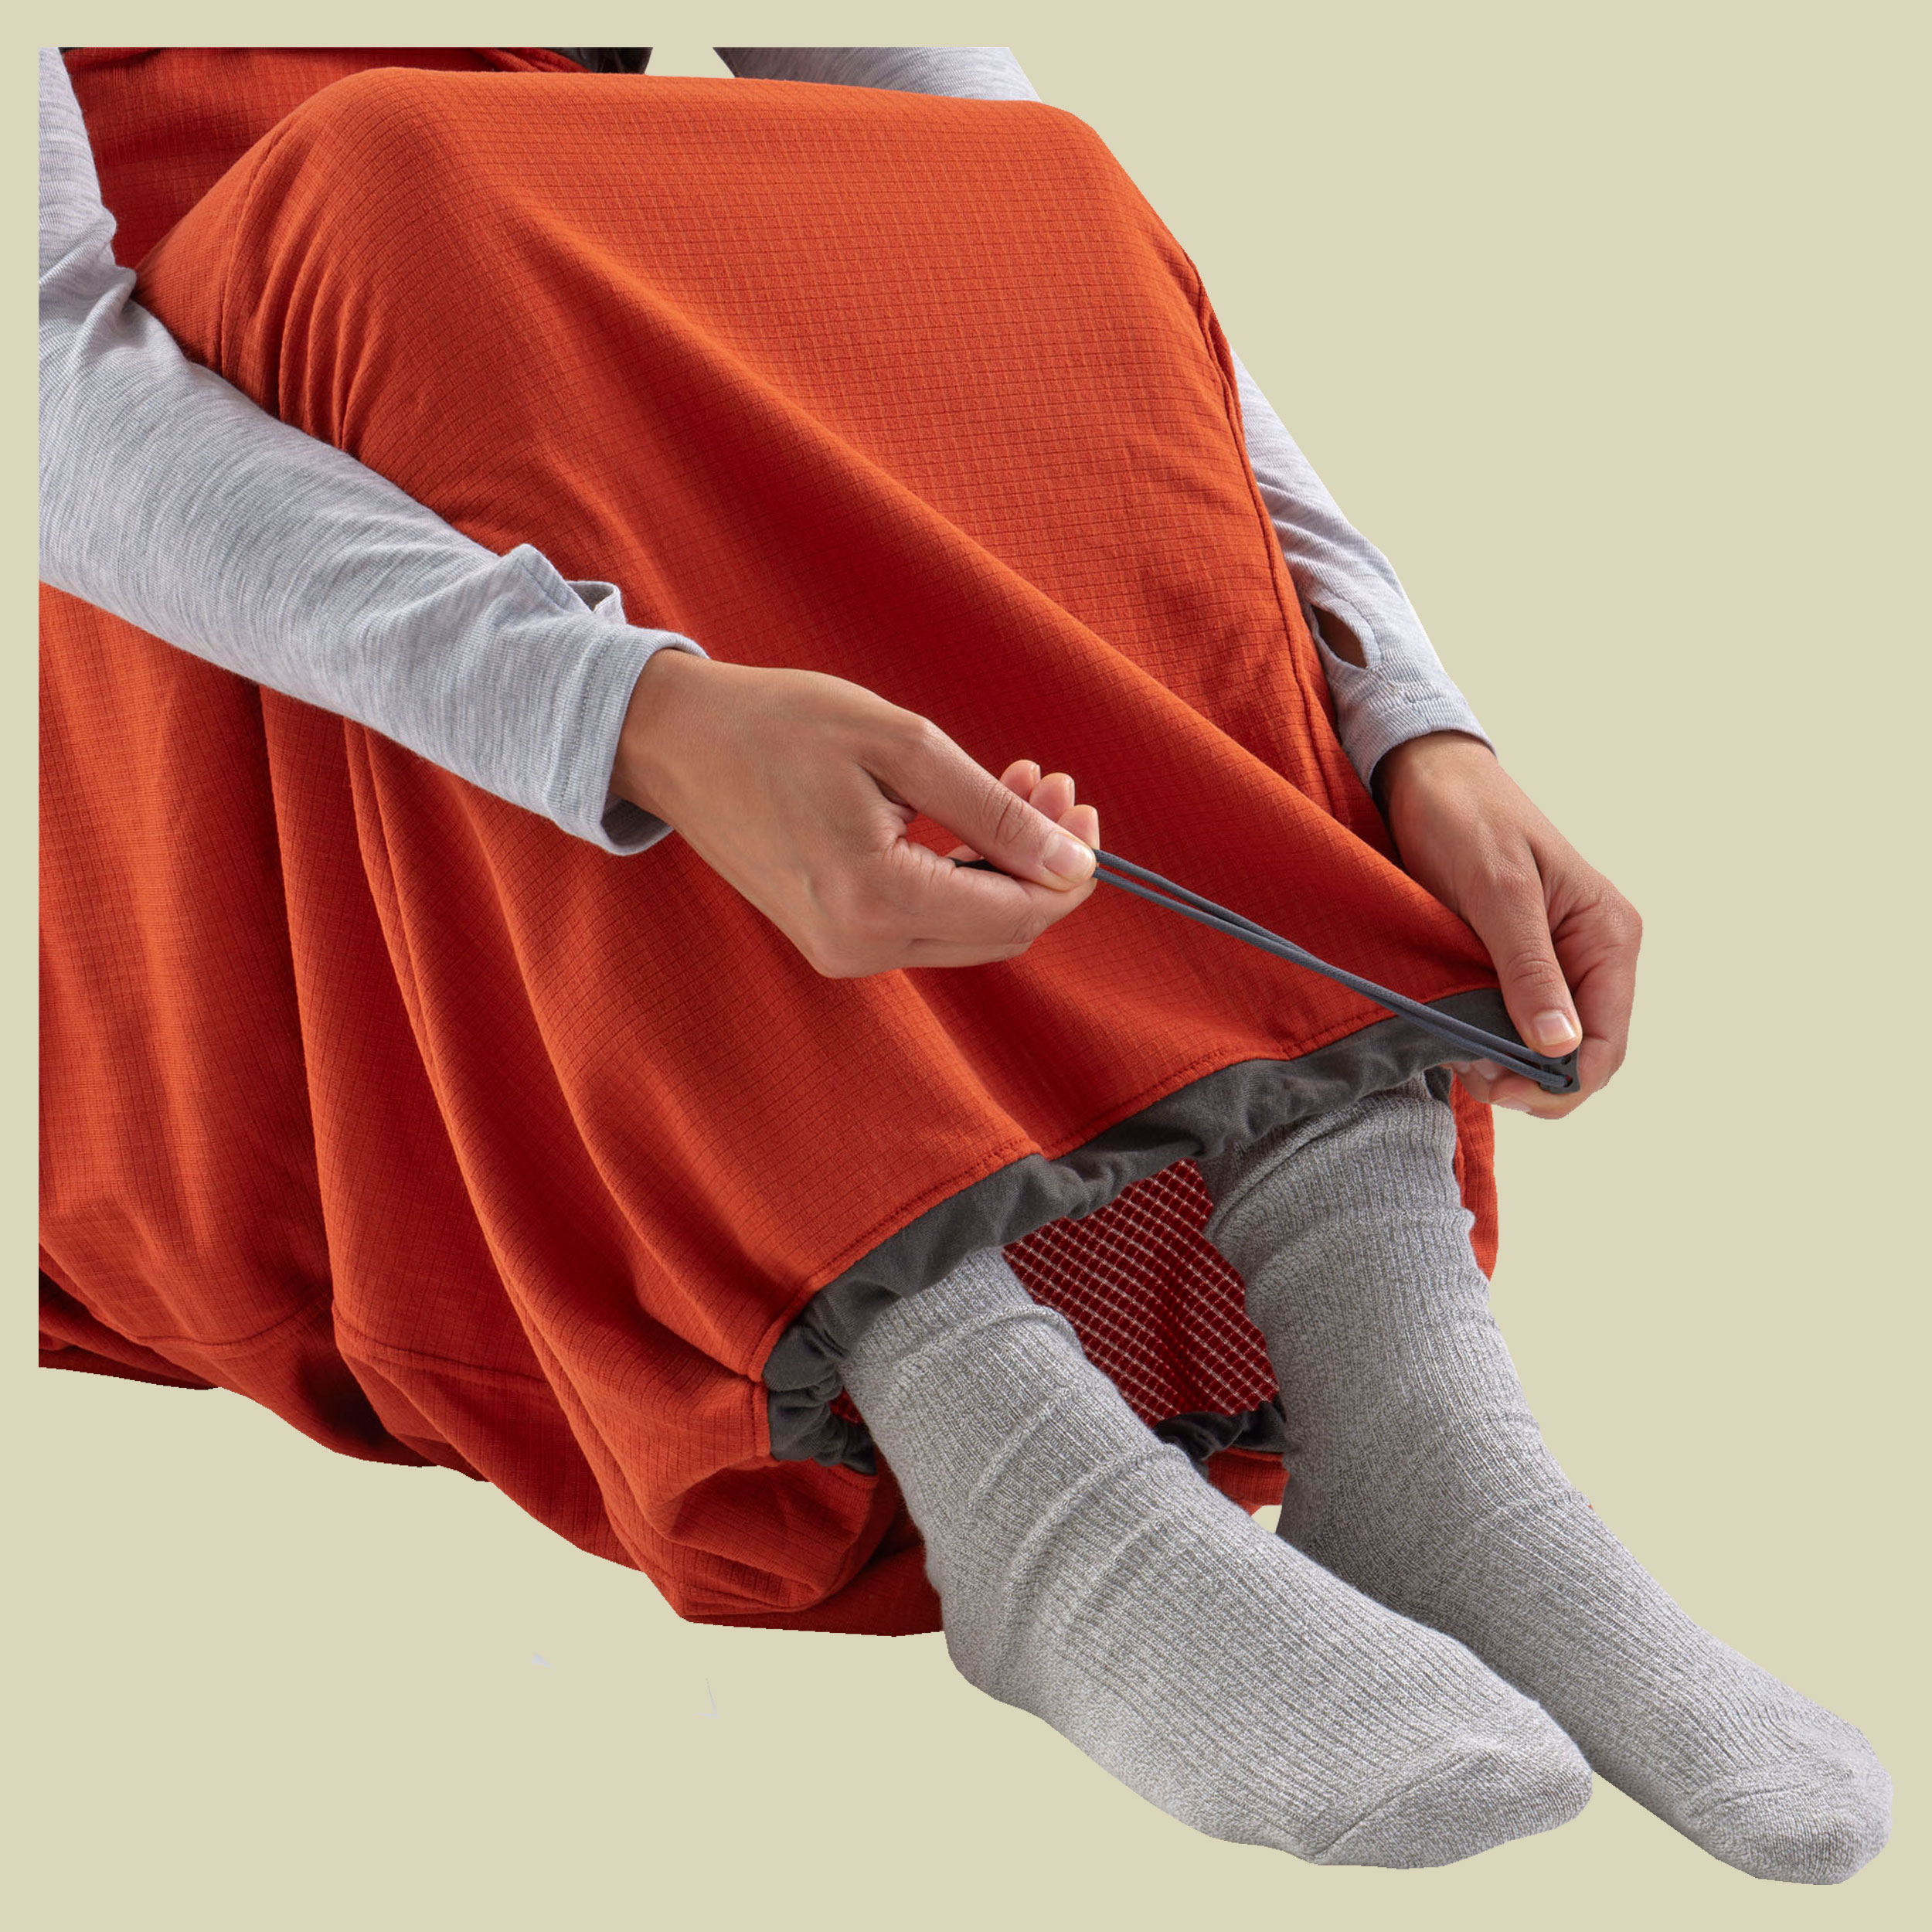 Reactor Fleece Sleeping Bag Liner - Mummy w/ Drawcord Standard rot - picante red